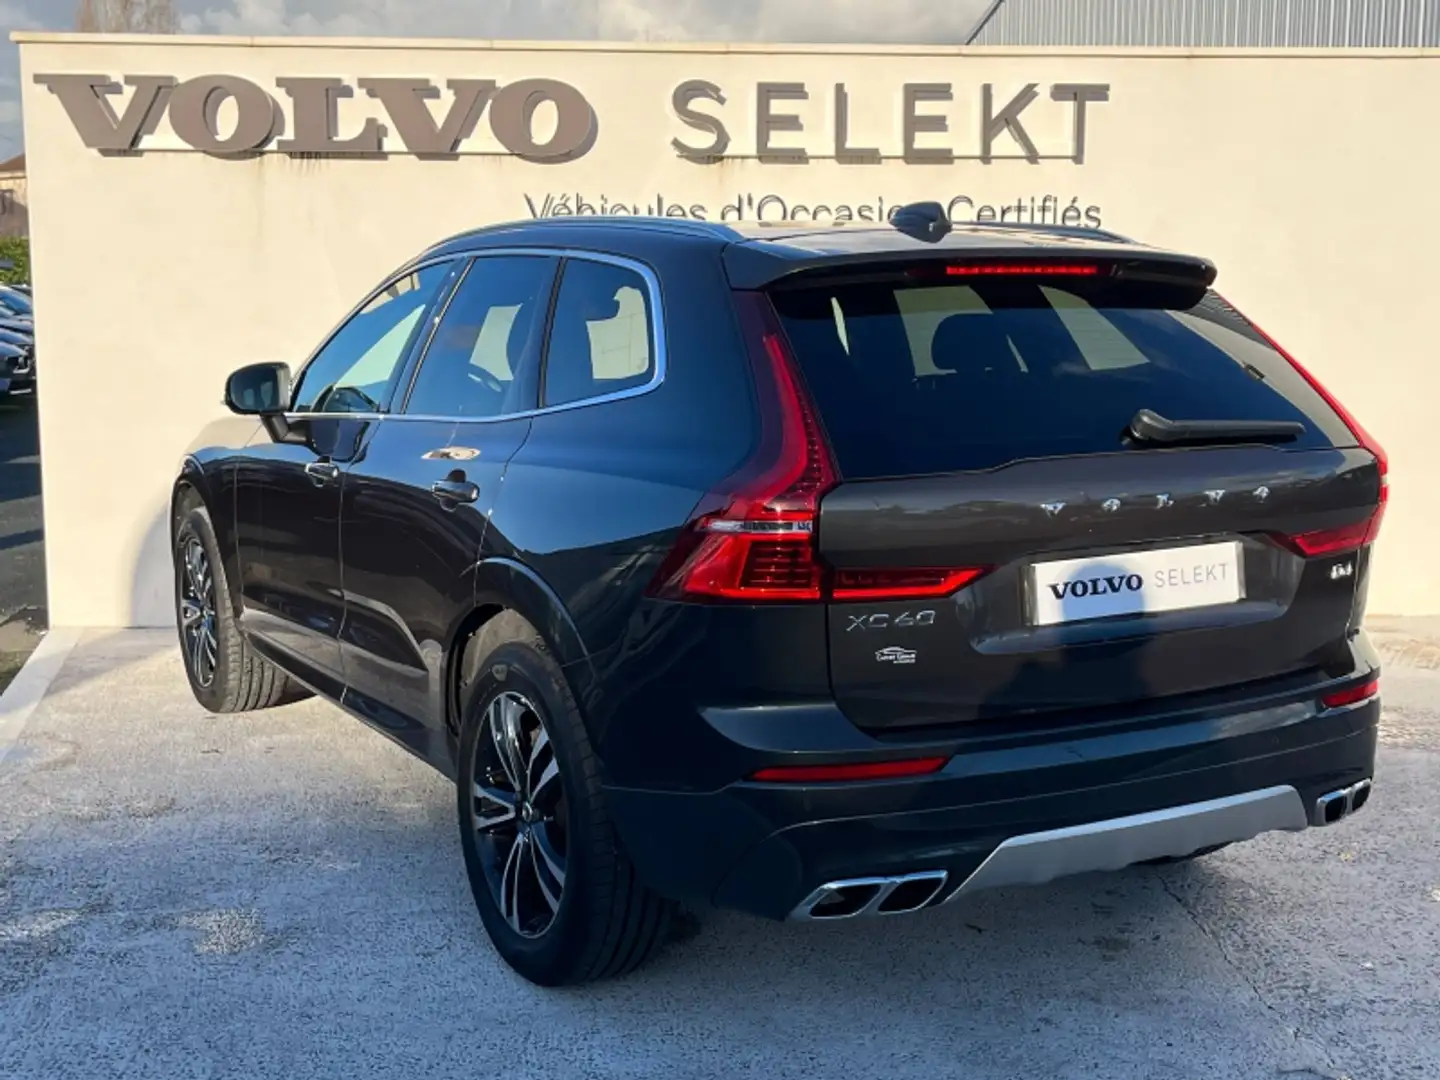 Volvo XC60 D4 AdBlue 190ch Initiate Edition Geartronic - 2